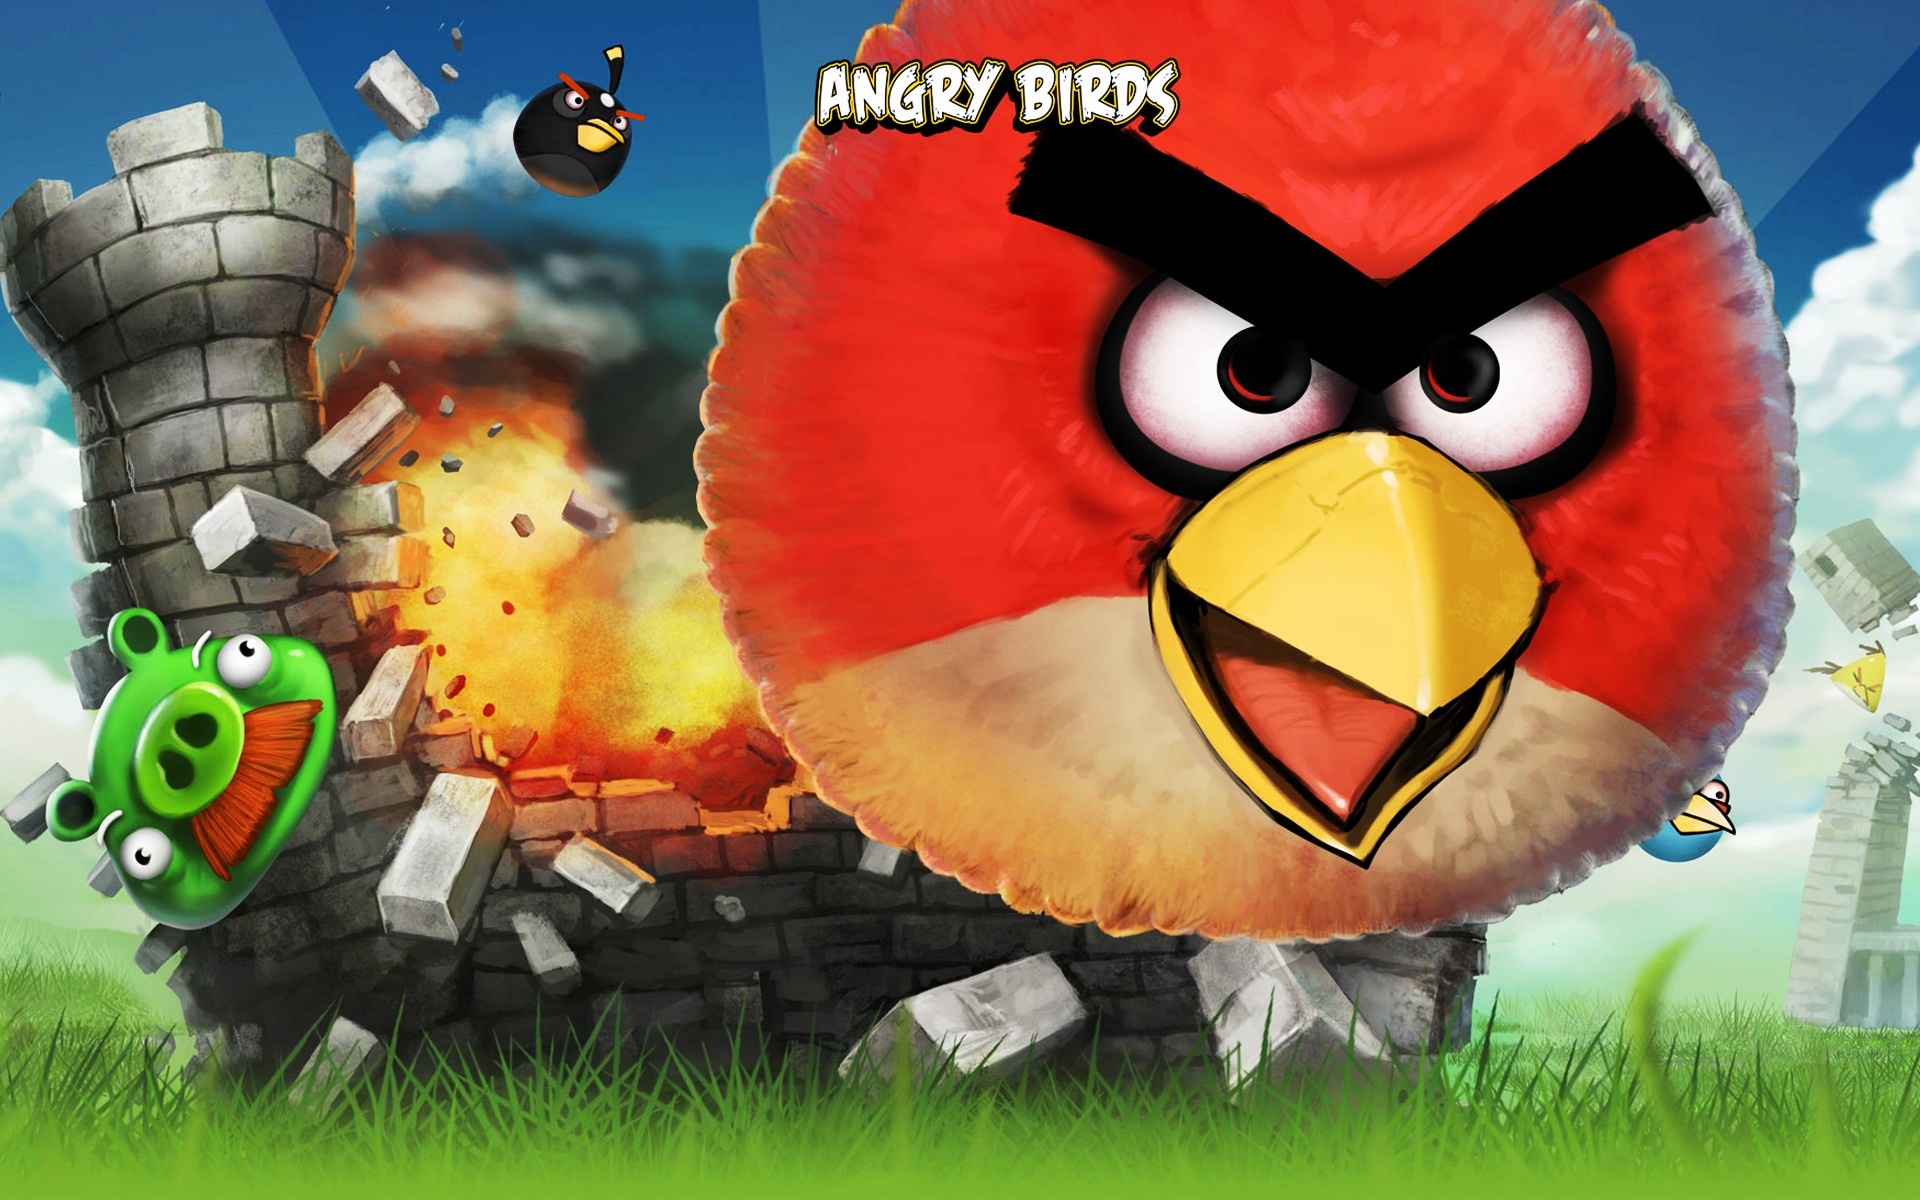 Angry Birds wallpapers | Angry Birds stock photos